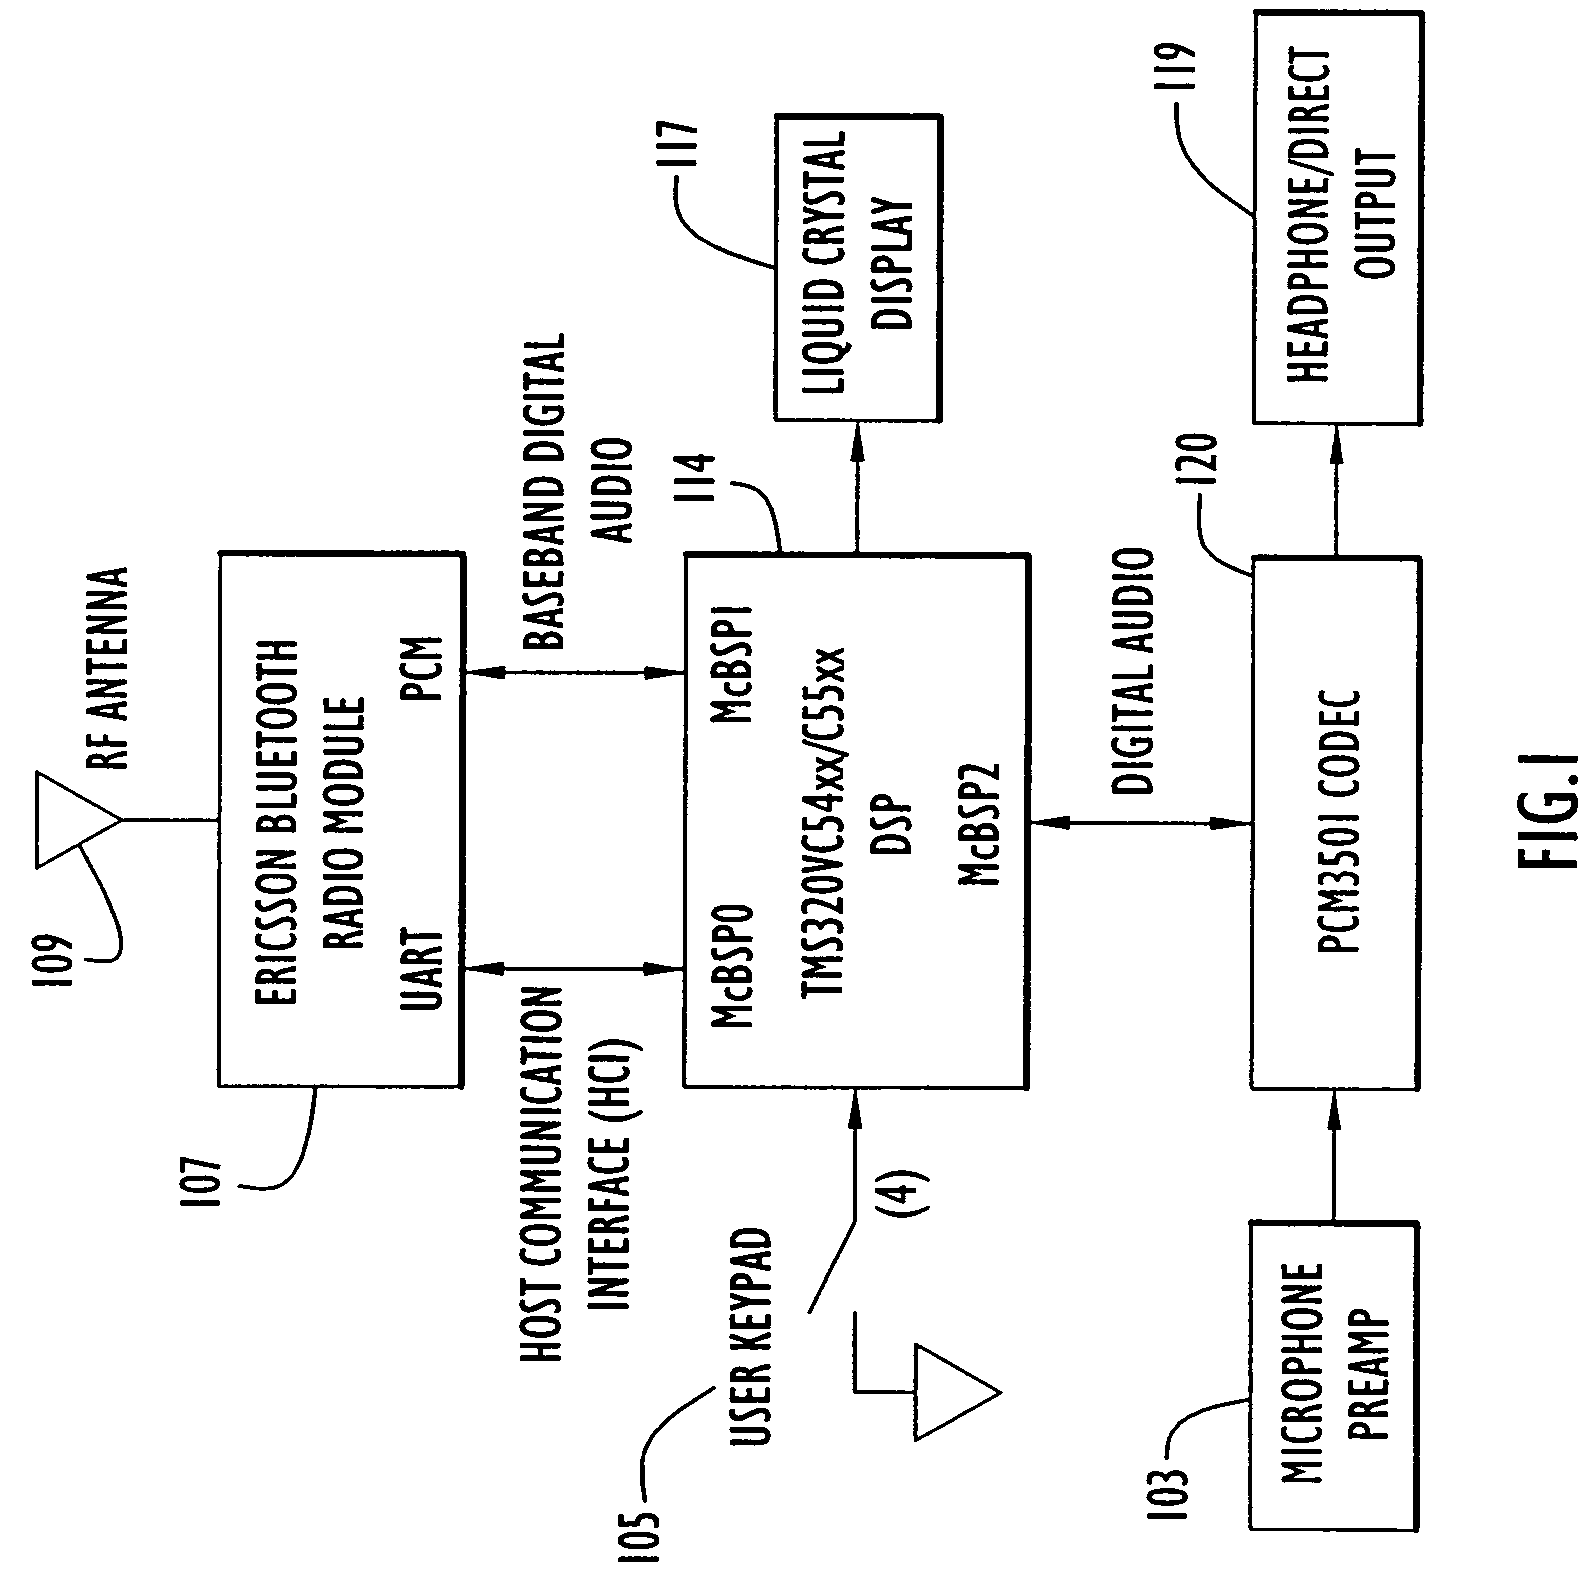 Method and system for delivering from a loudspeaker into a venue